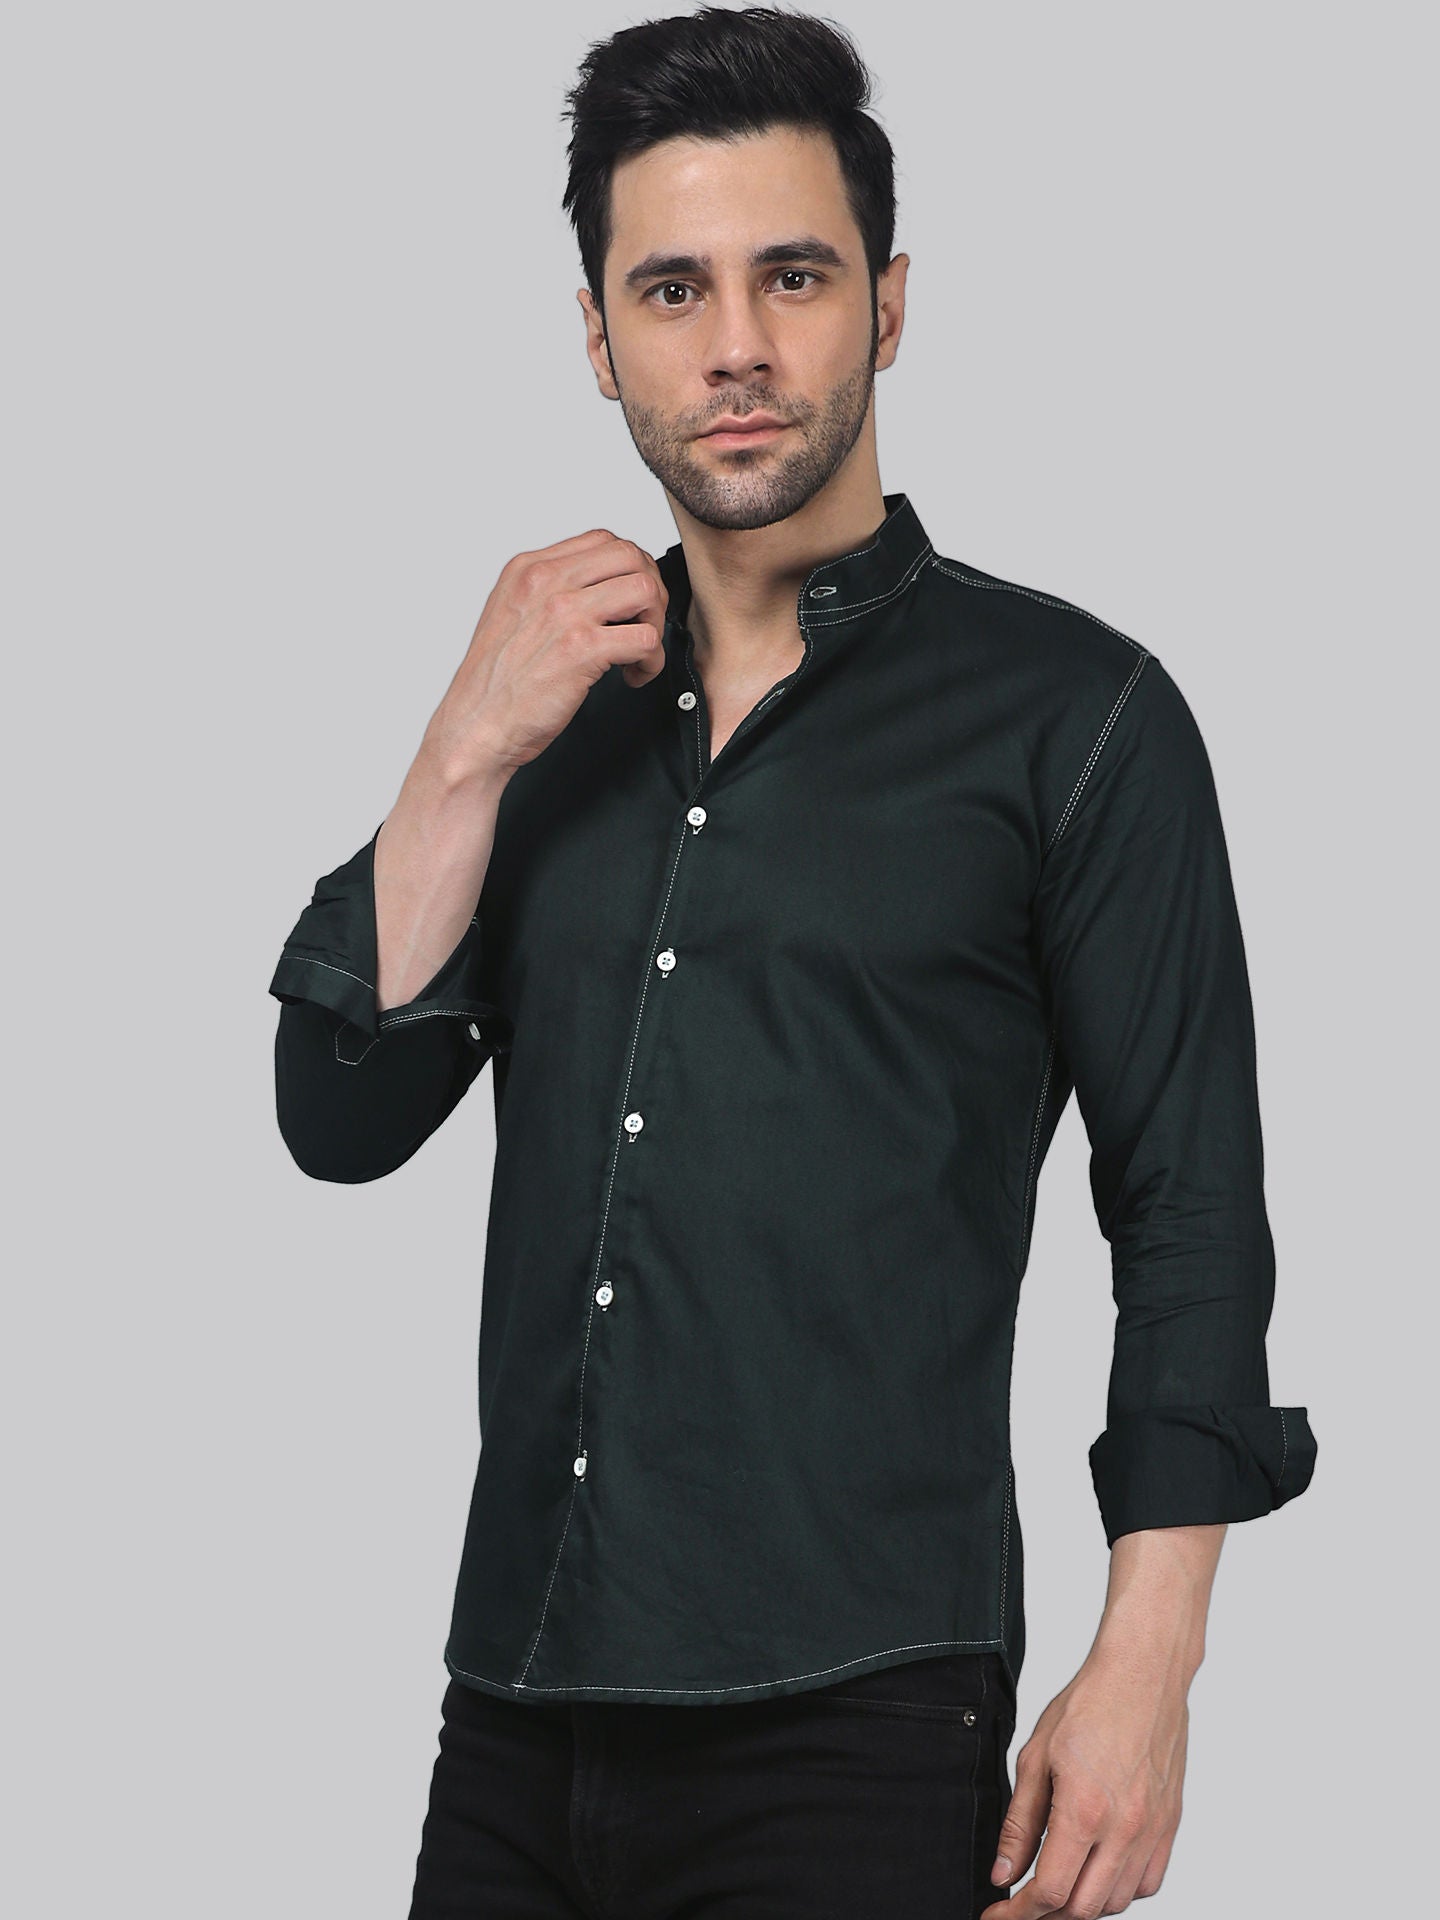 Streetwise TryBuy Premium Solid Dark Green Cotton Casual Shirt for Men - TryBuy® USA🇺🇸